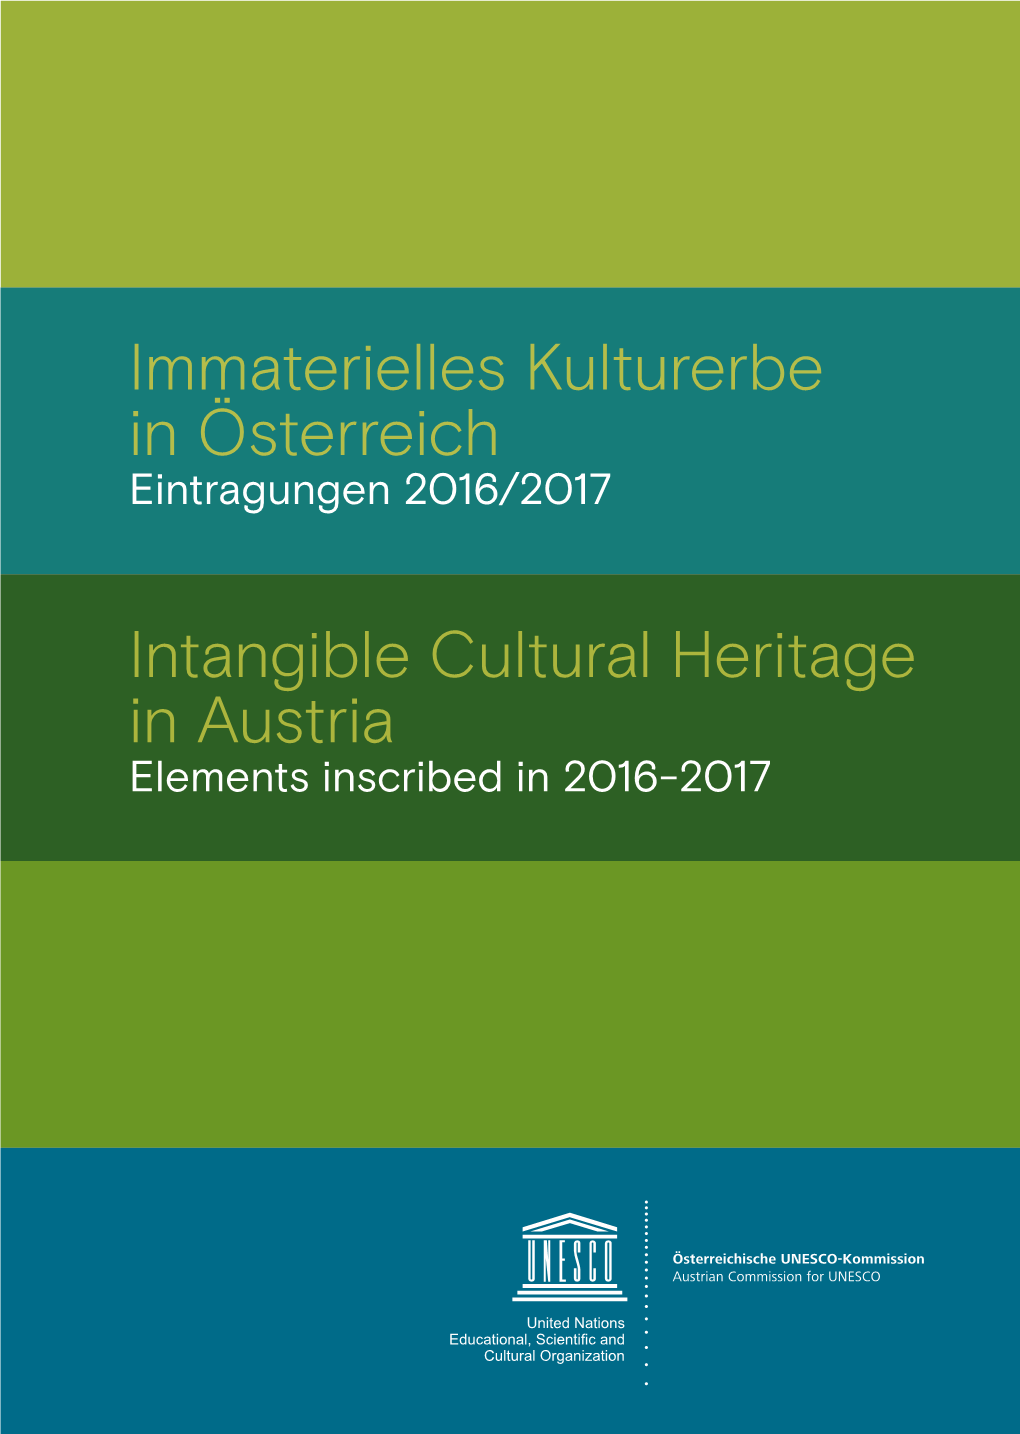 Immaterielles Kulturerbe in Österreich Intangible Cultural Heritage in Austria